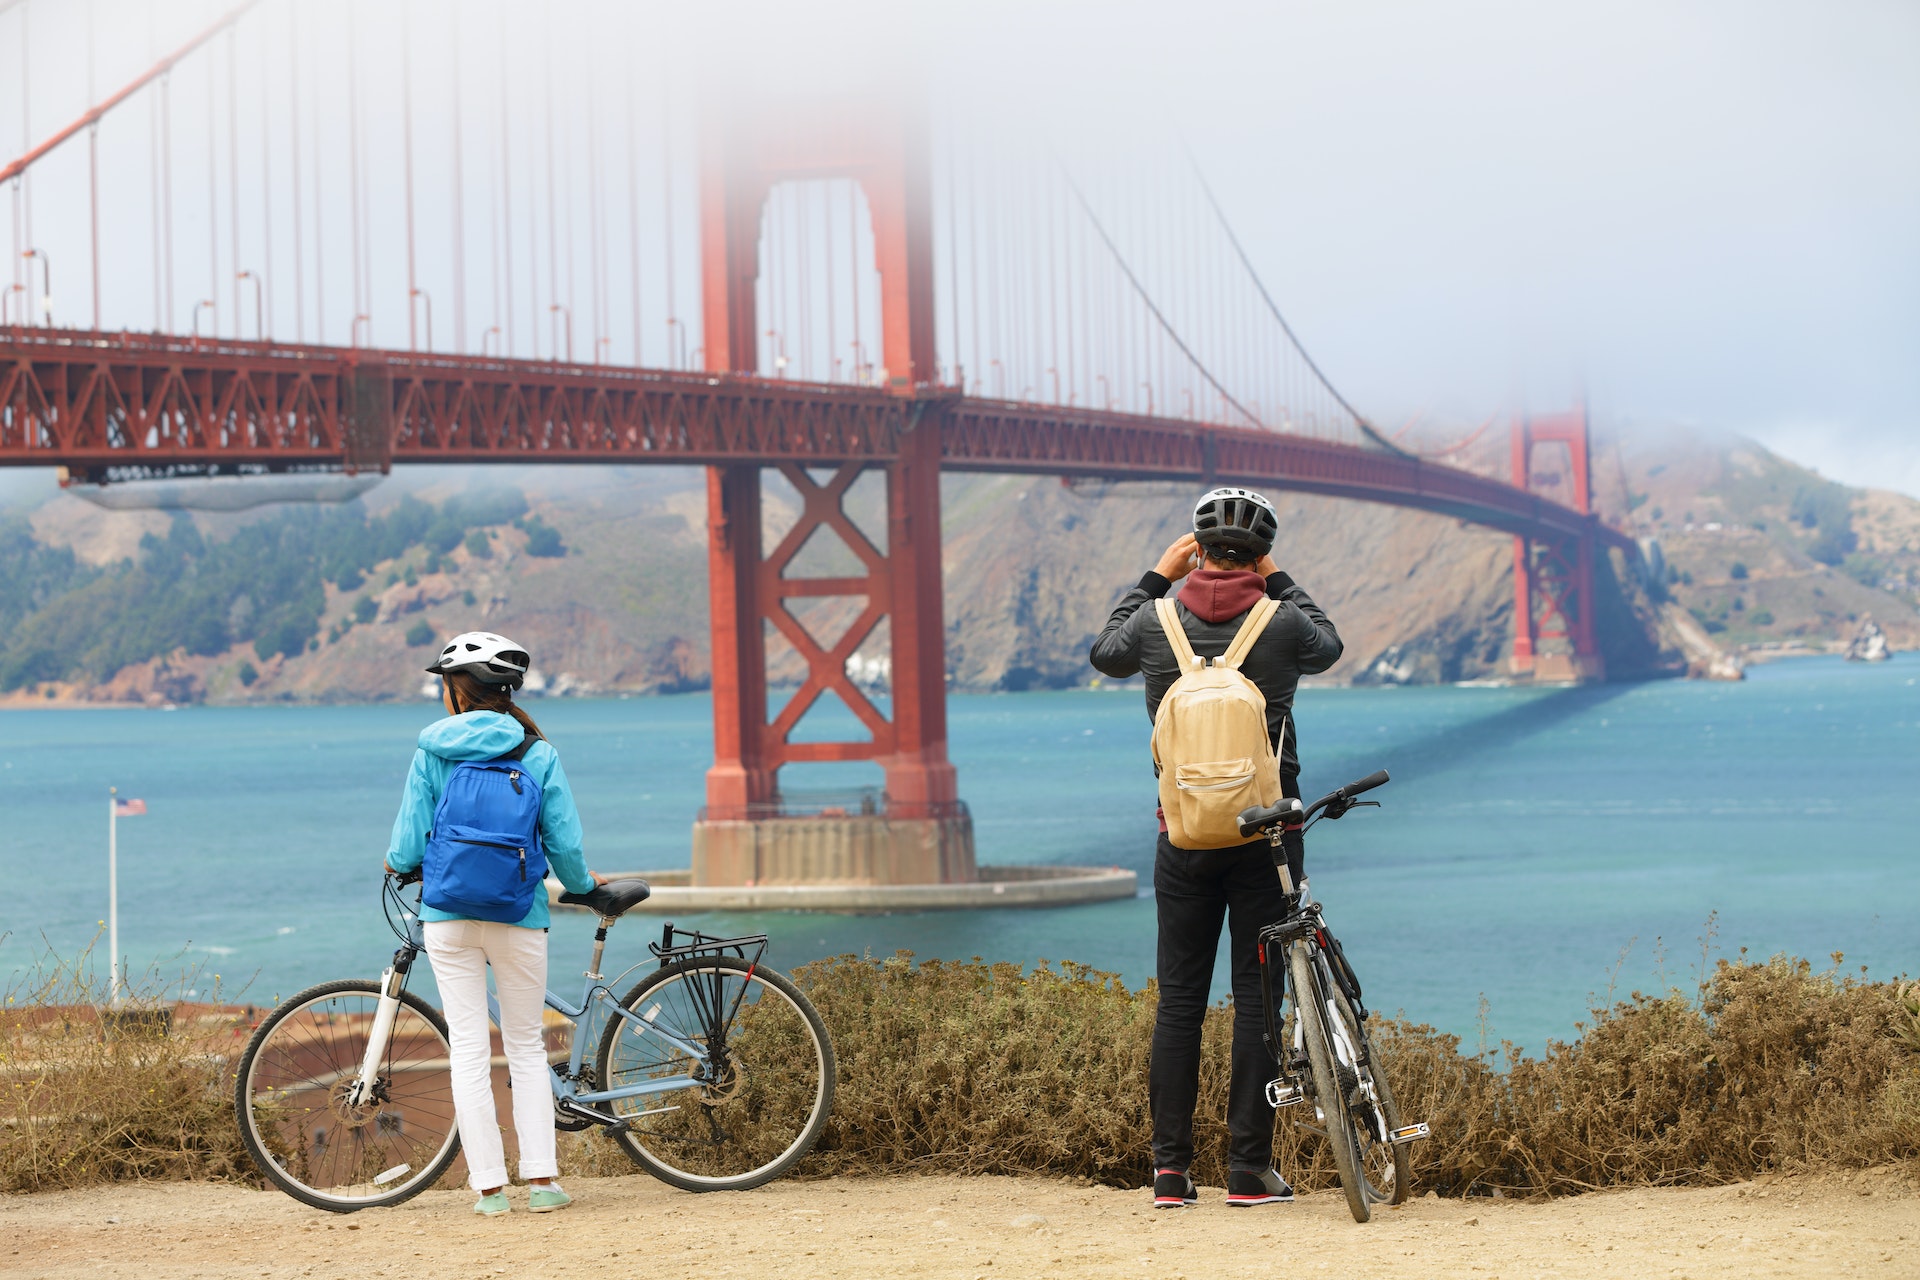 A couple with bikes pause on a trail to take photos of a large orange-red bridge shrouded in fog